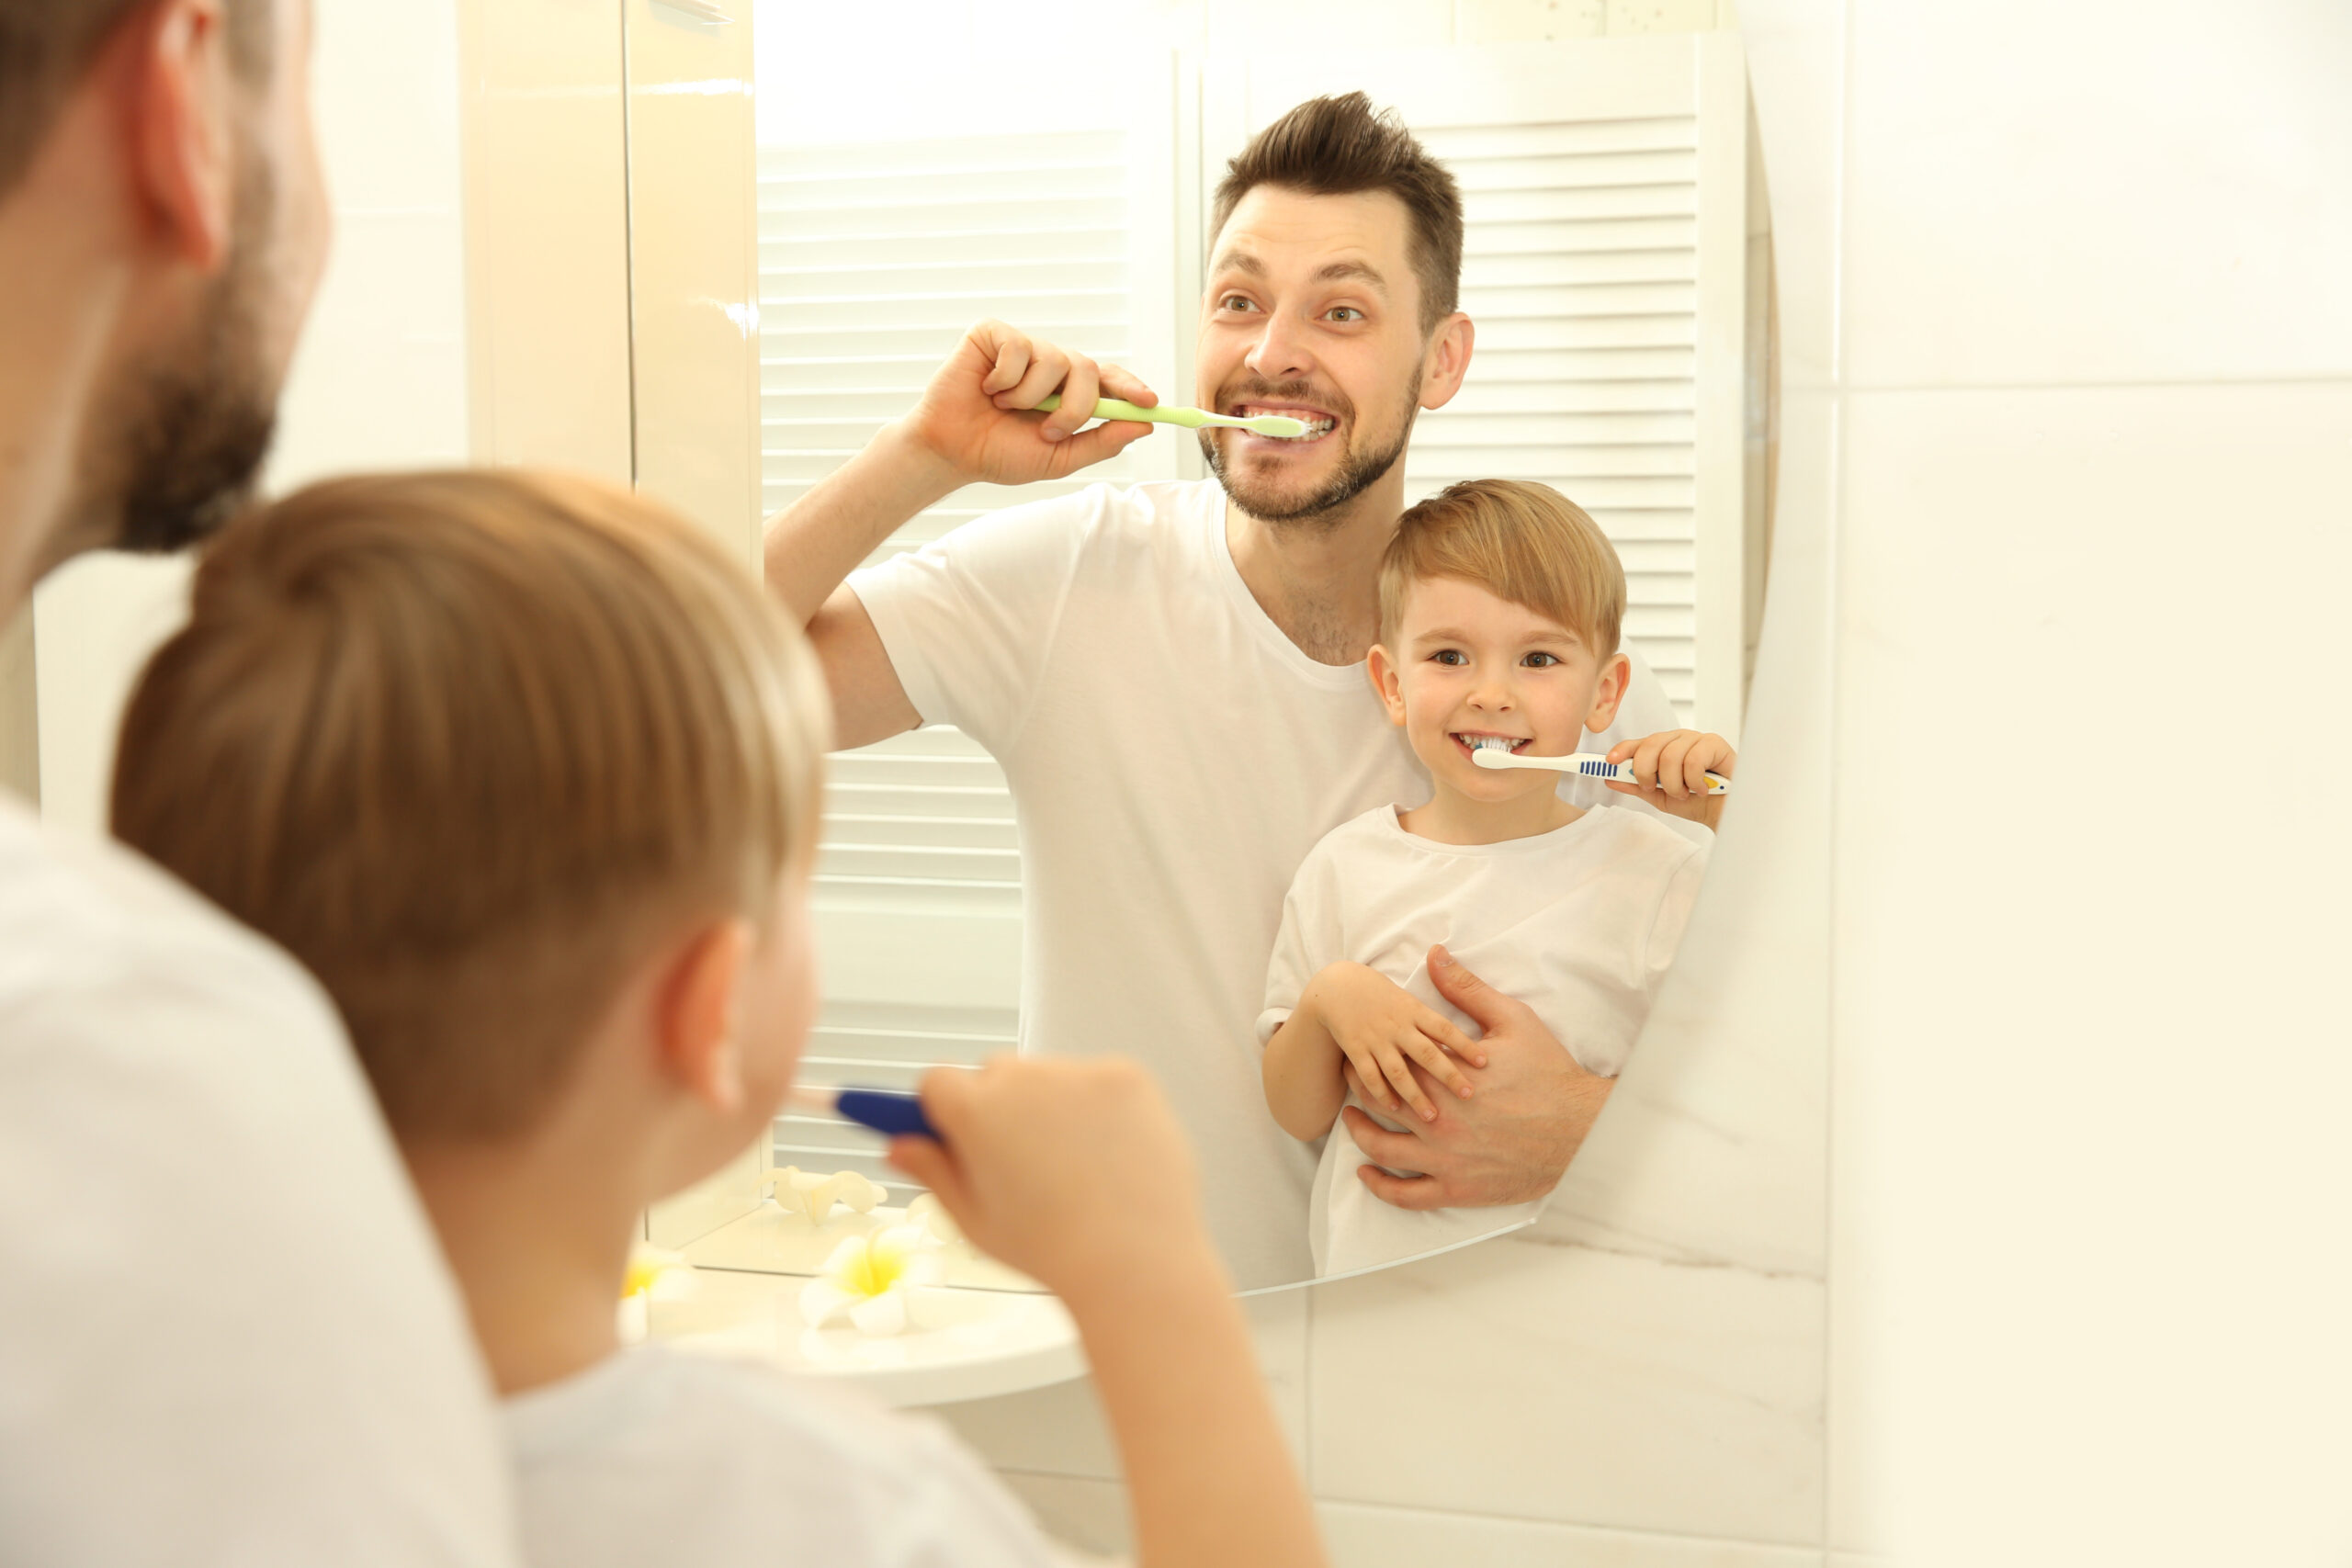 Inspire kids to be proud of their mouths by brushing with them